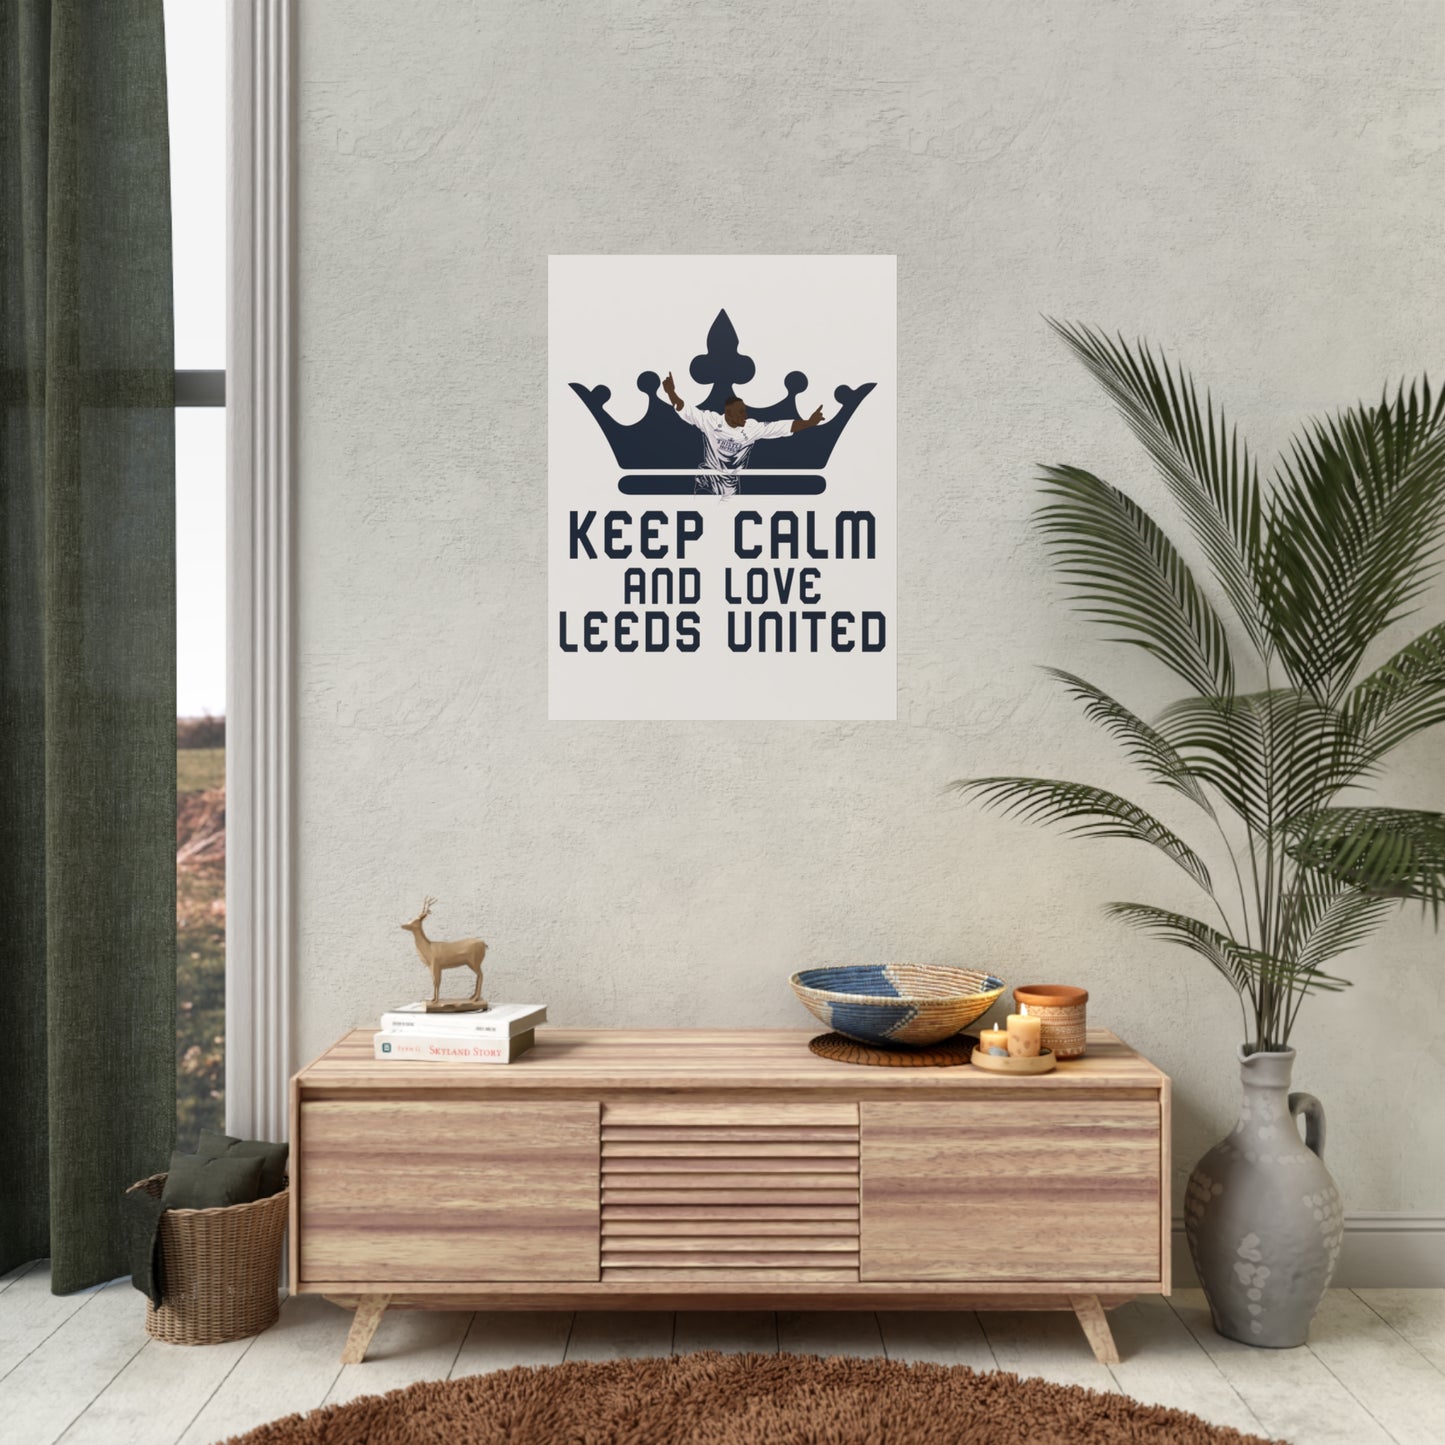 Póster "Keep Calm And Love Leeds United"